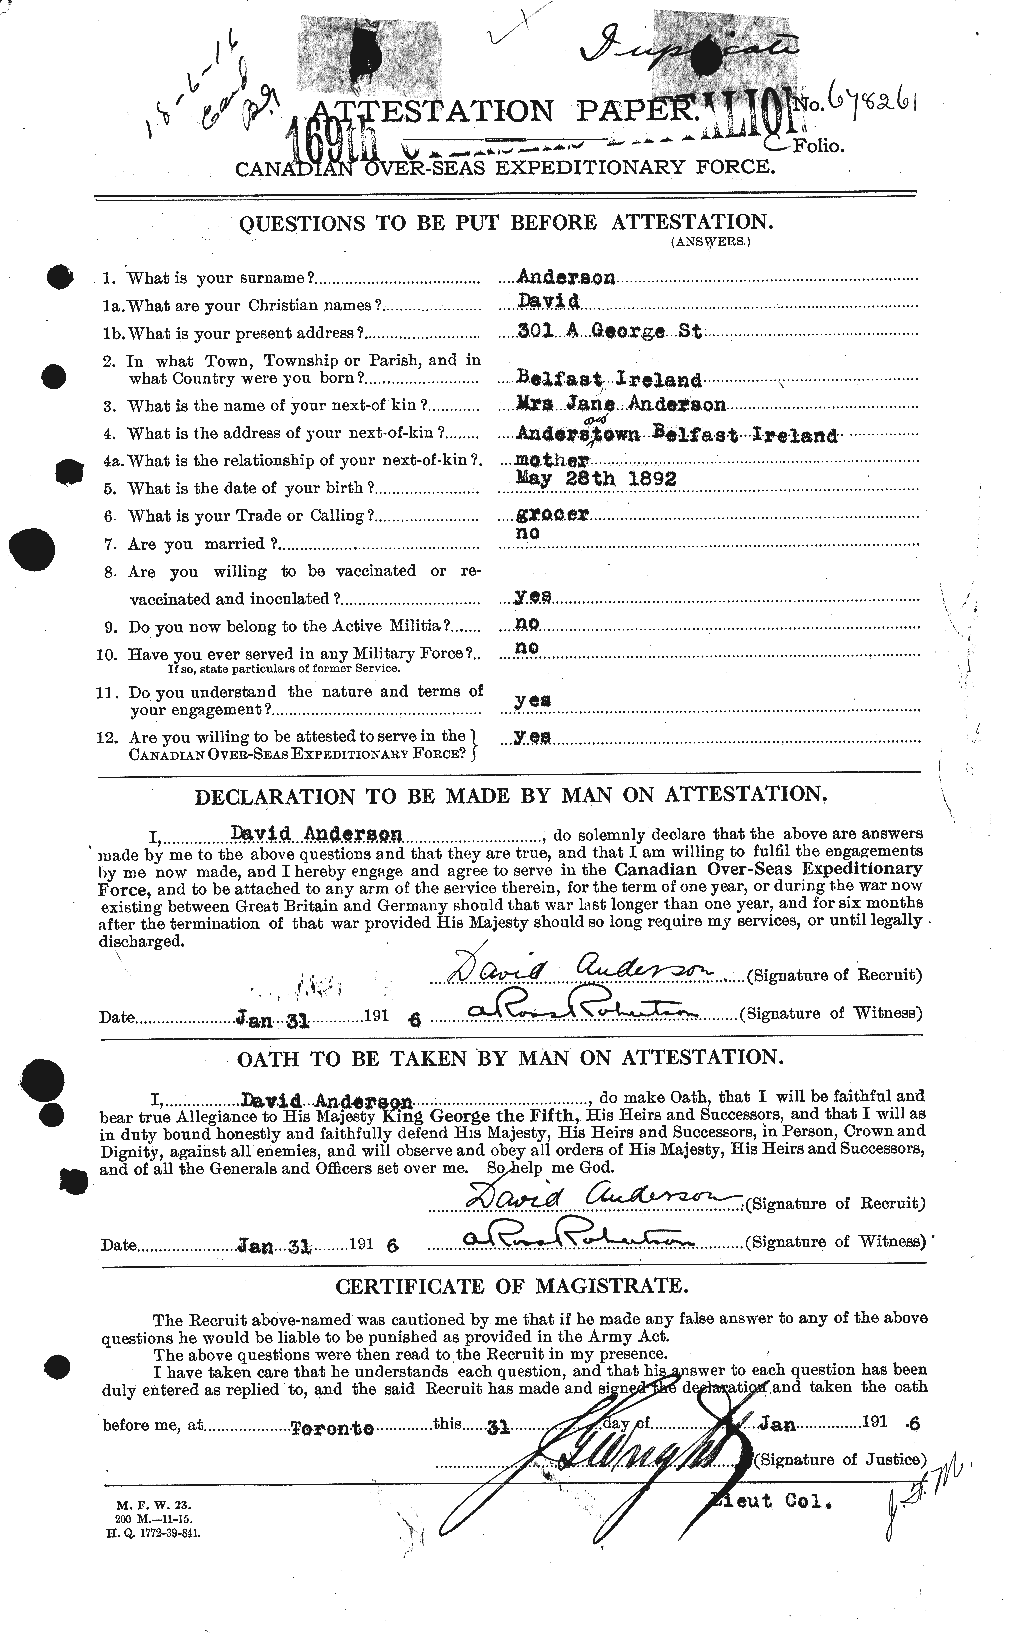 Personnel Records of the First World War - CEF 210041a